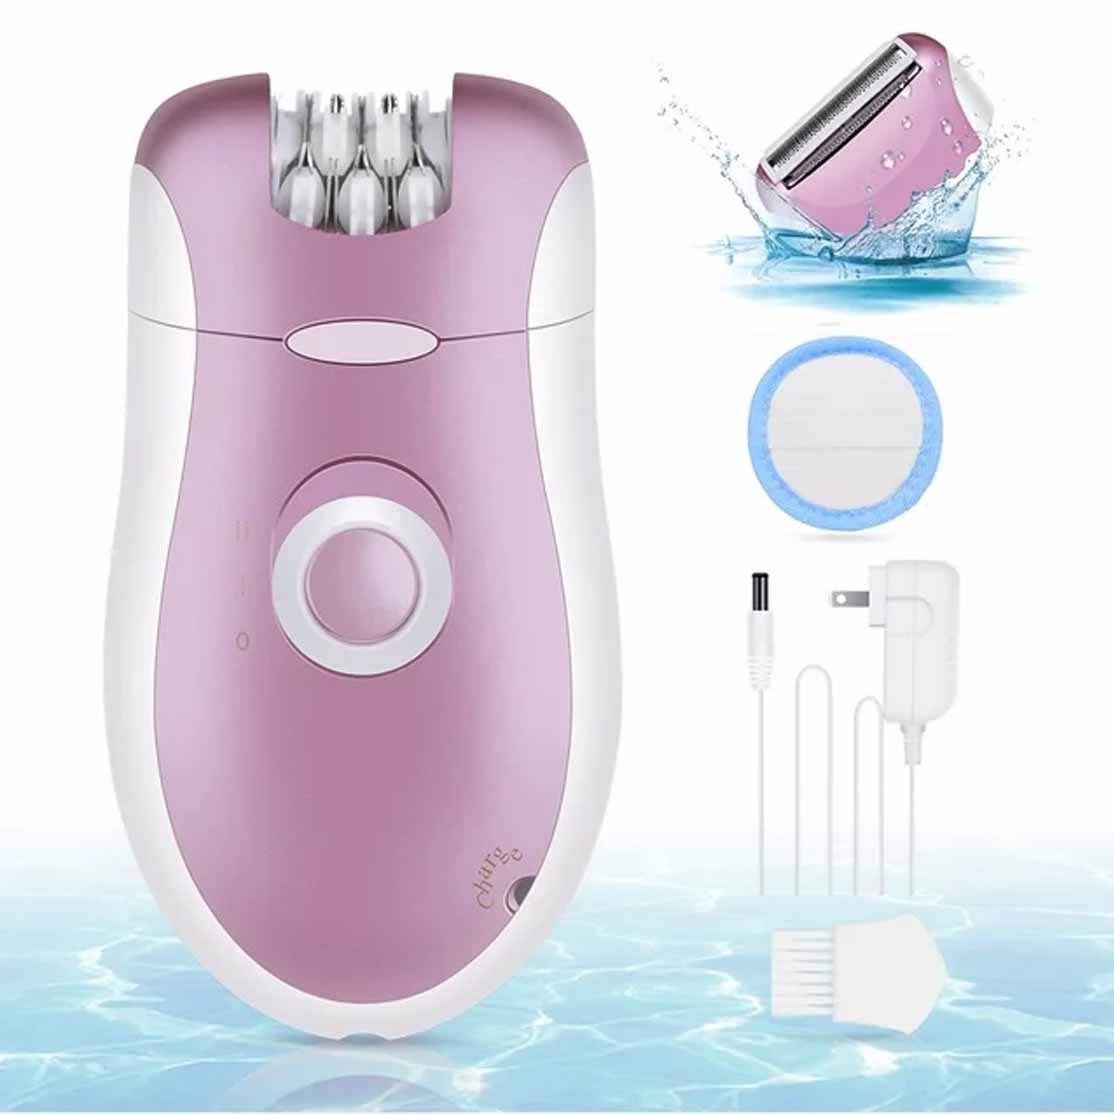 Besunny 2-IN-1 Epilator for Women in pink and white